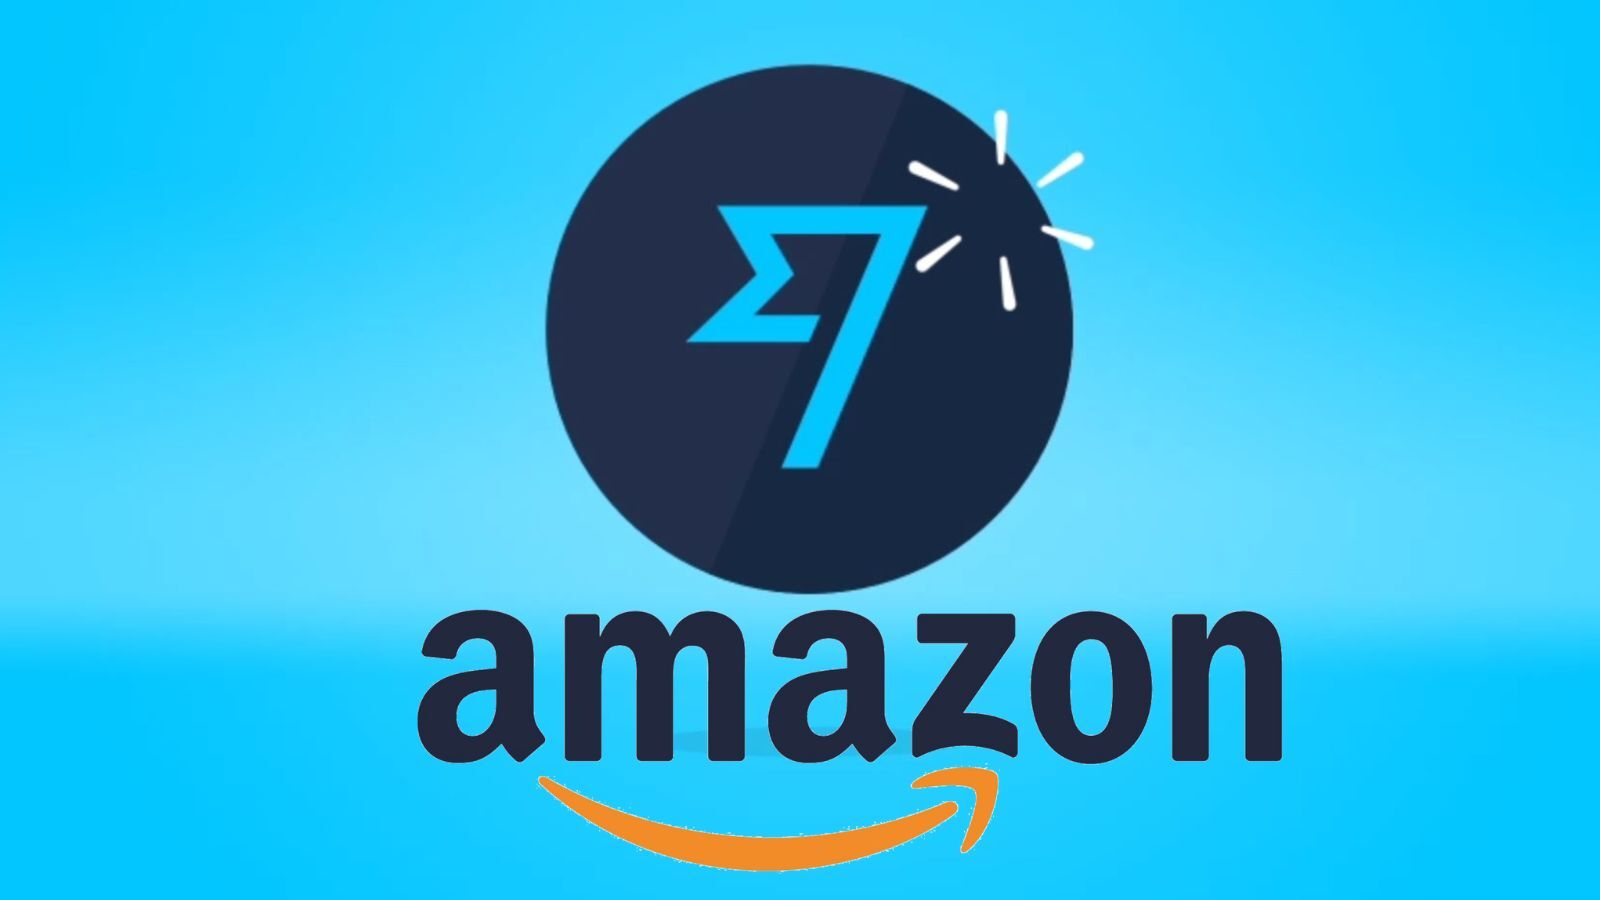 Does Amazon Accept Transferwise? (Yes, But Not Available In All Countries)